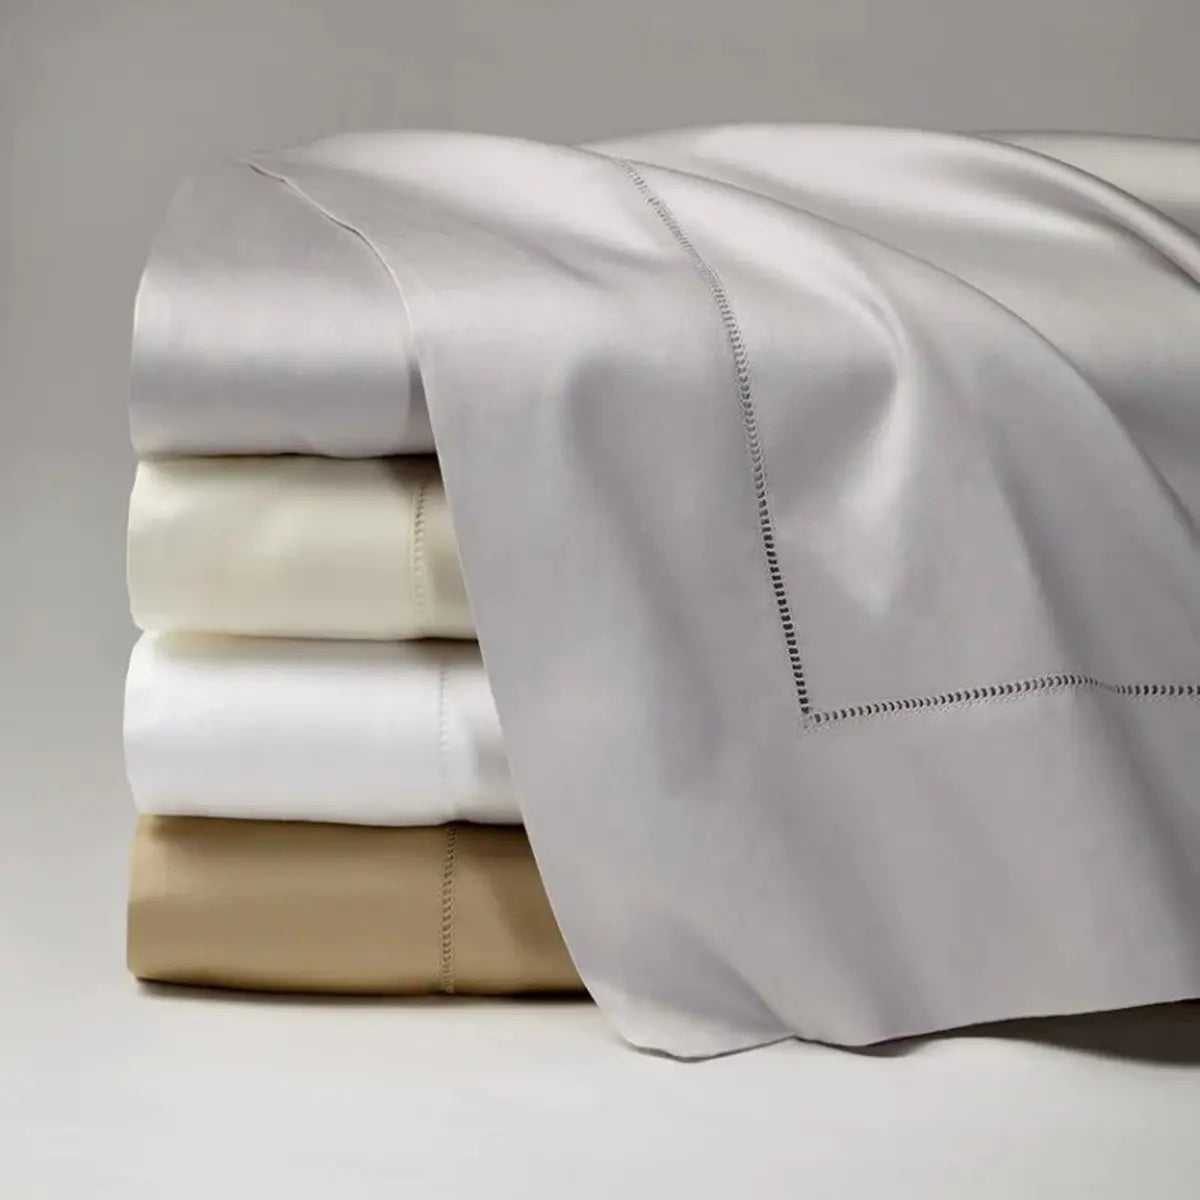 Sferra Fiona Flat Sheet Collection stacked together